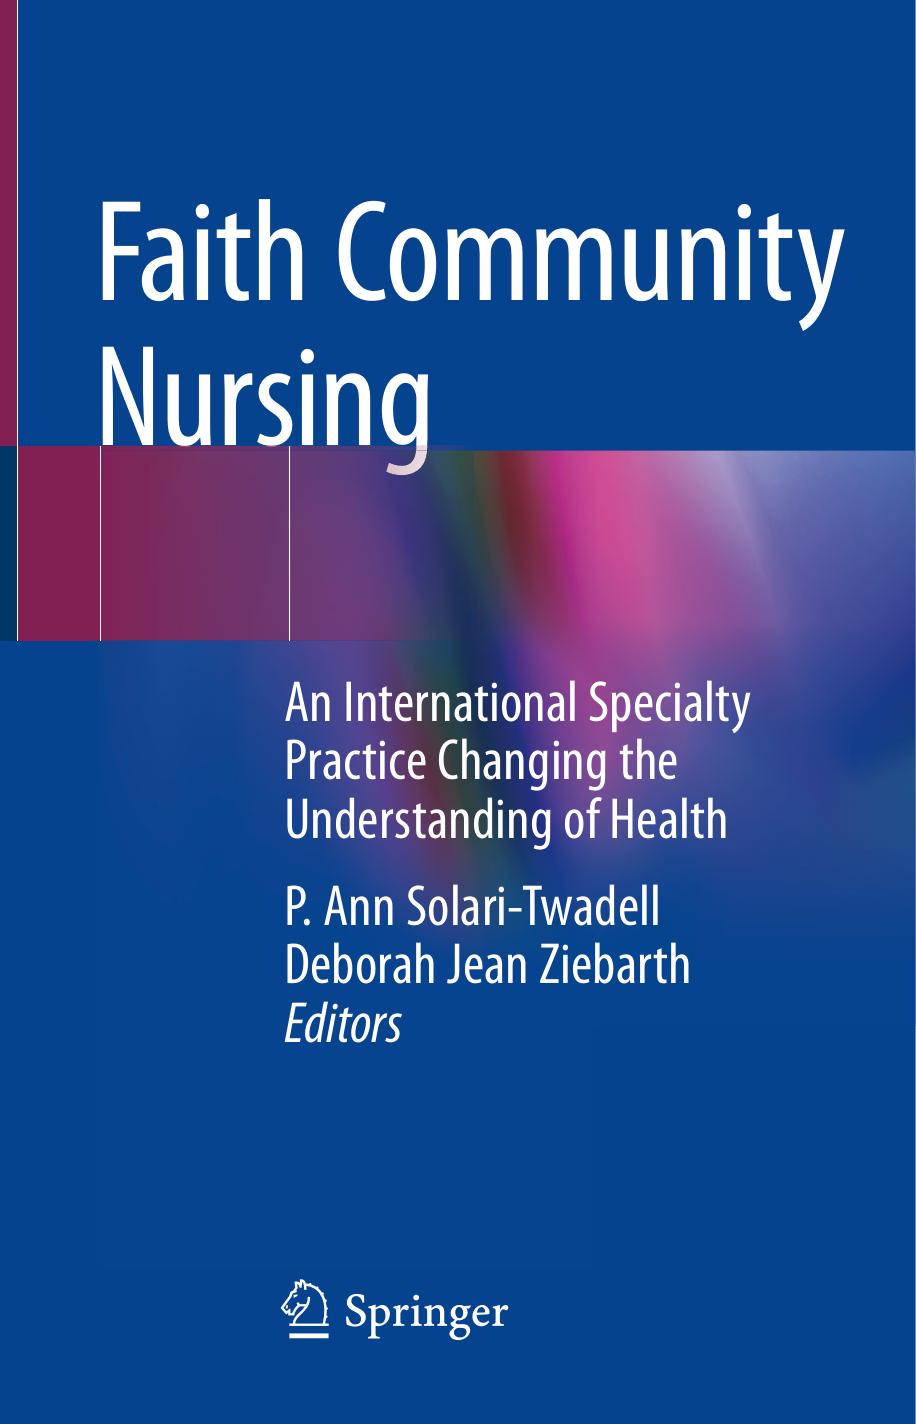 Faith Community Nursing  An International Specialty Practice Changing the Understanding of Health (2021)